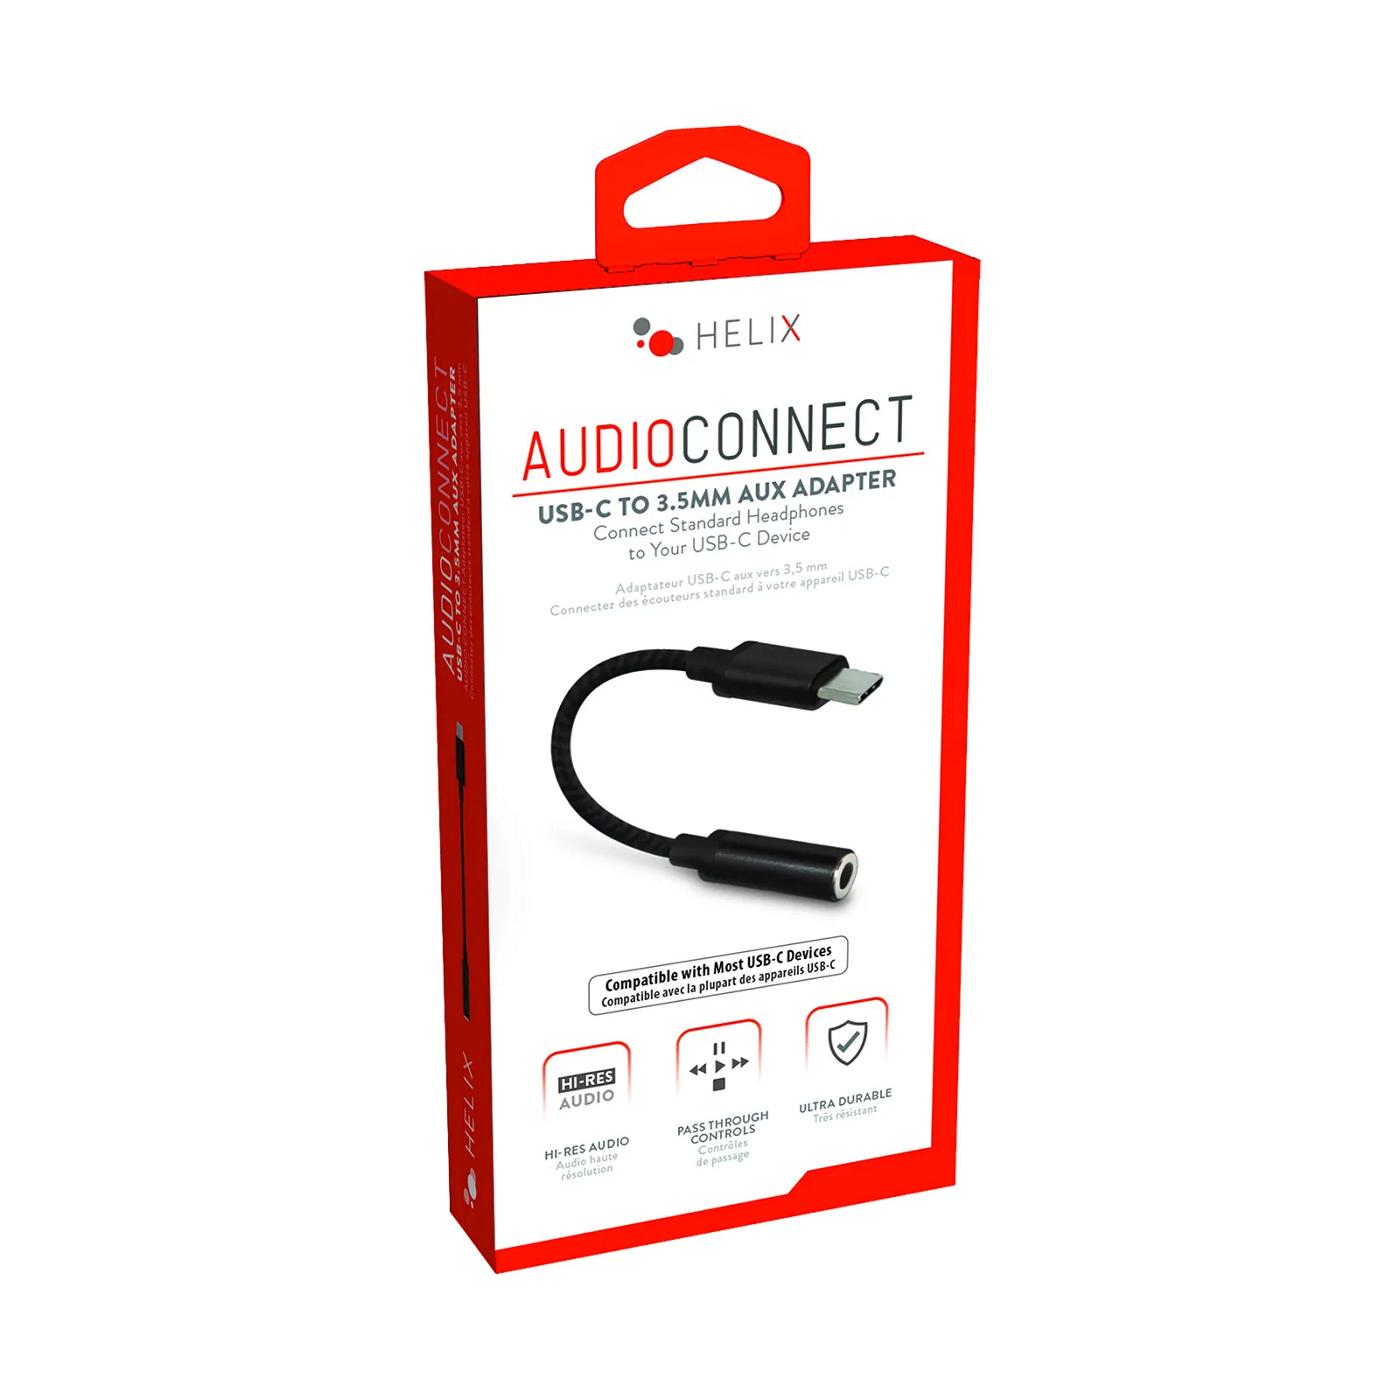 Helix Audio Connect USB-C to 3.5mm Aux Adapter - Shop Connection Cables at  H-E-B